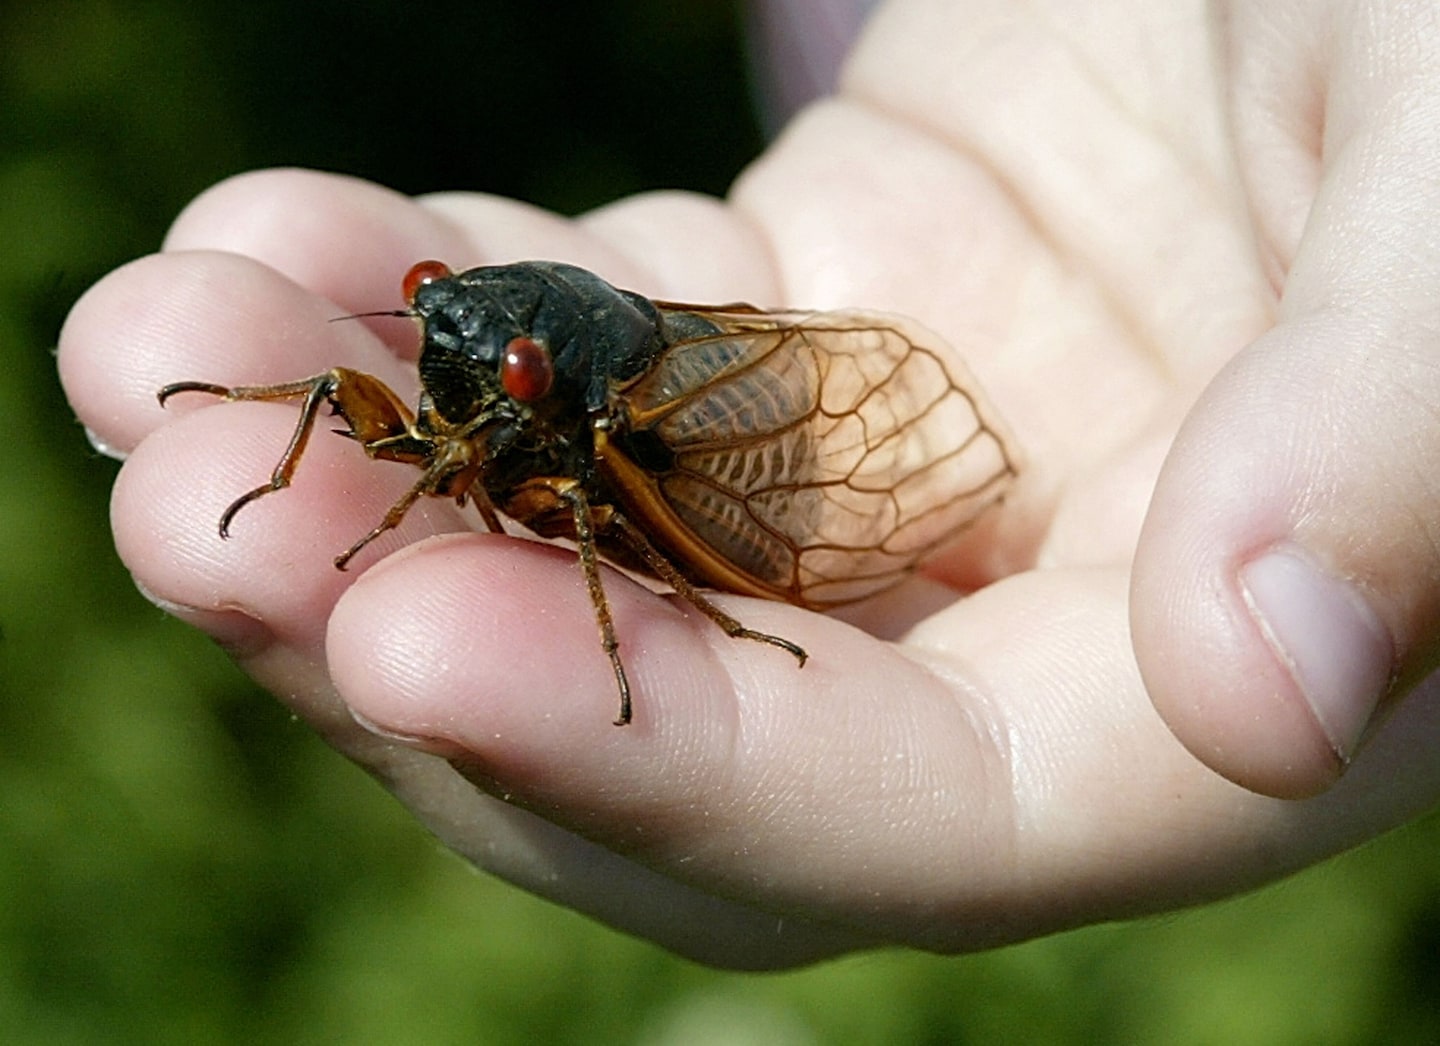 "If the climate continues too warm...all of the 17-year cicadas in this area could eventually become 13-year cicadas."